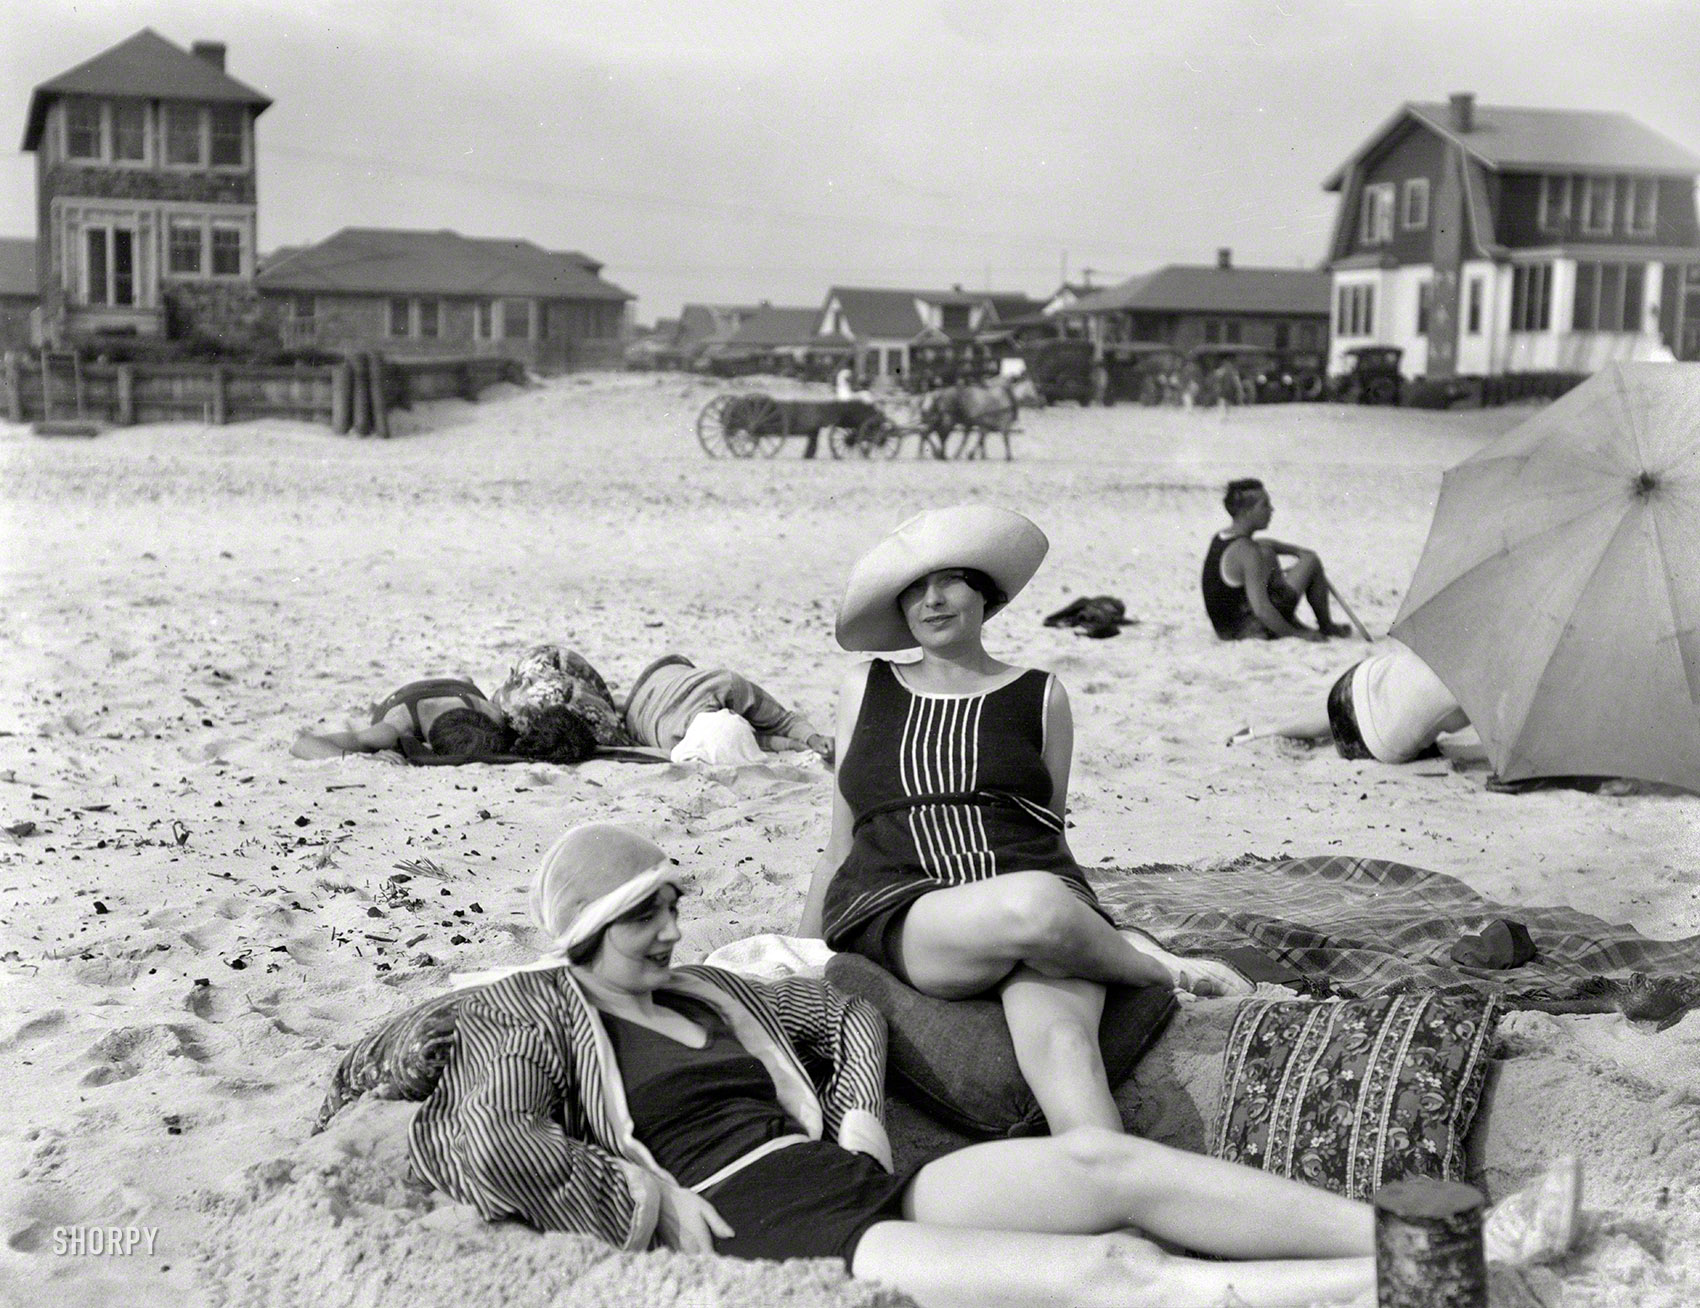 1920s. "Unidentified women at Long Beach, New York." Two Jazz Age sunbathers just in from West Egg. Nitrate negative by Arnold Genthe. View full size.